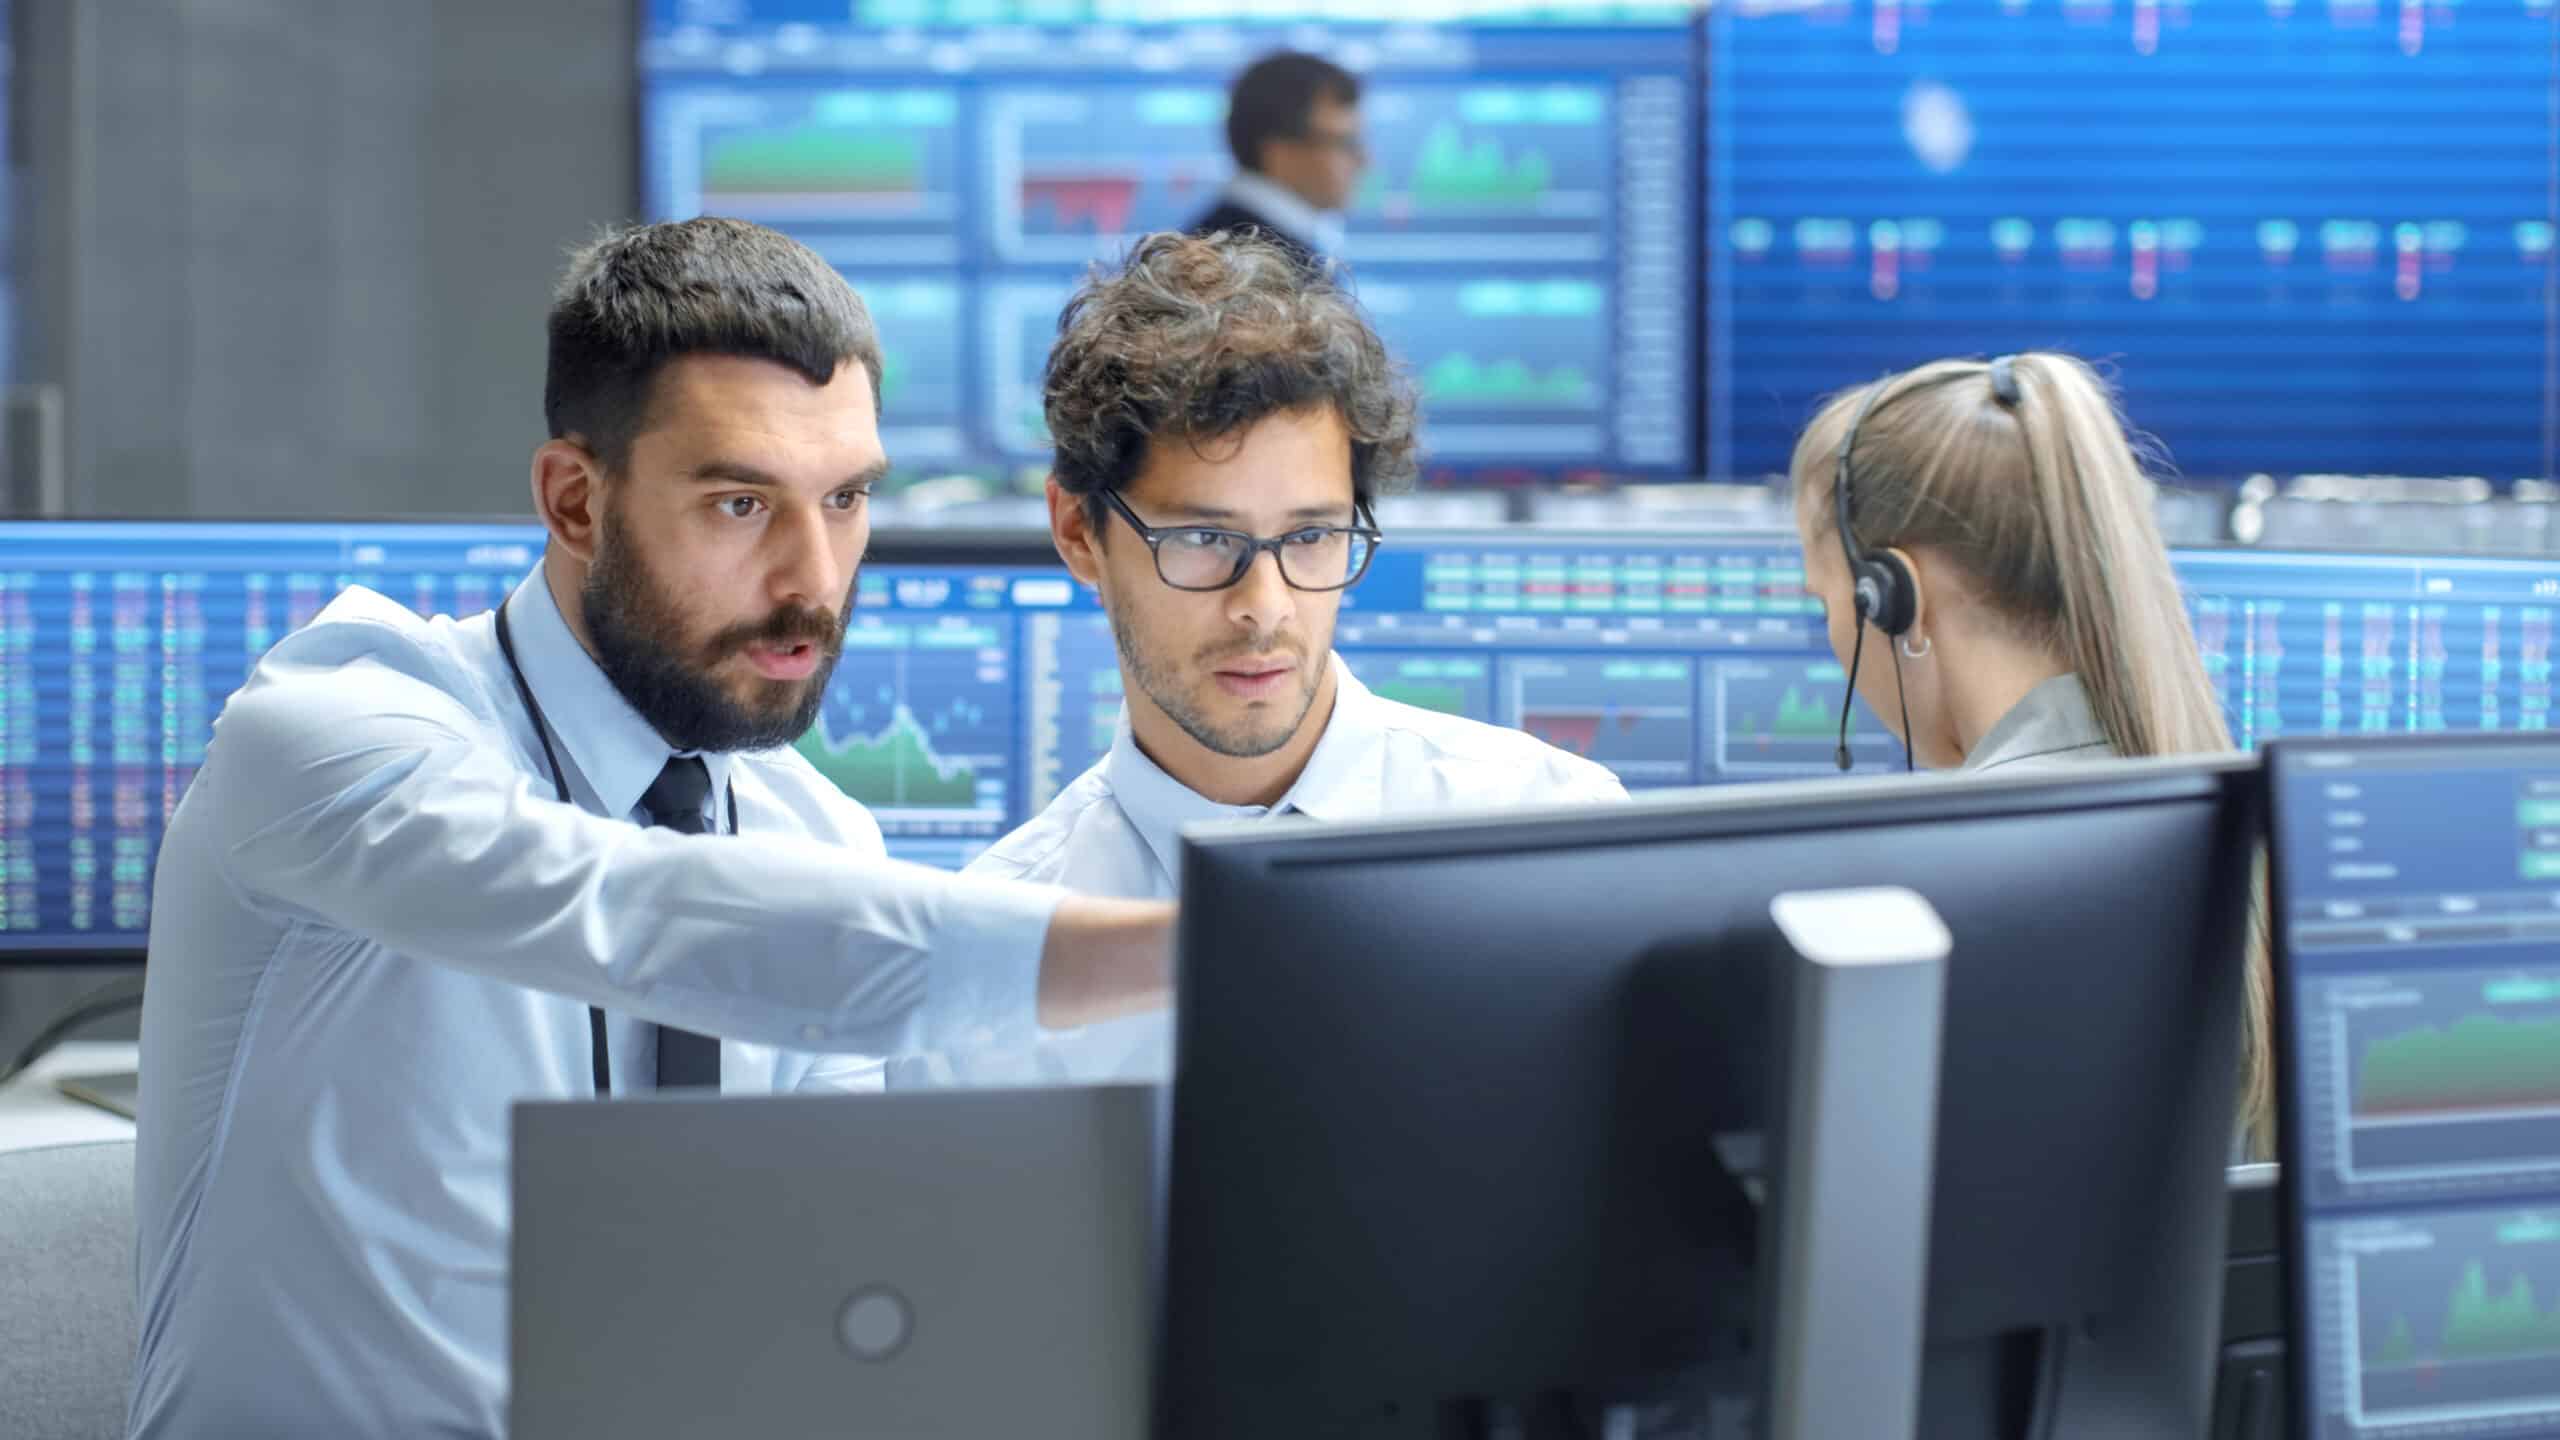 Professional Broker Consults Stock Exchange Trader at His Workstation. Multi-Ethnic Team at Stock Exchange Office is Busy Selling and Buying Stocks on the Market. Displays Show Relevant Data Numbers.